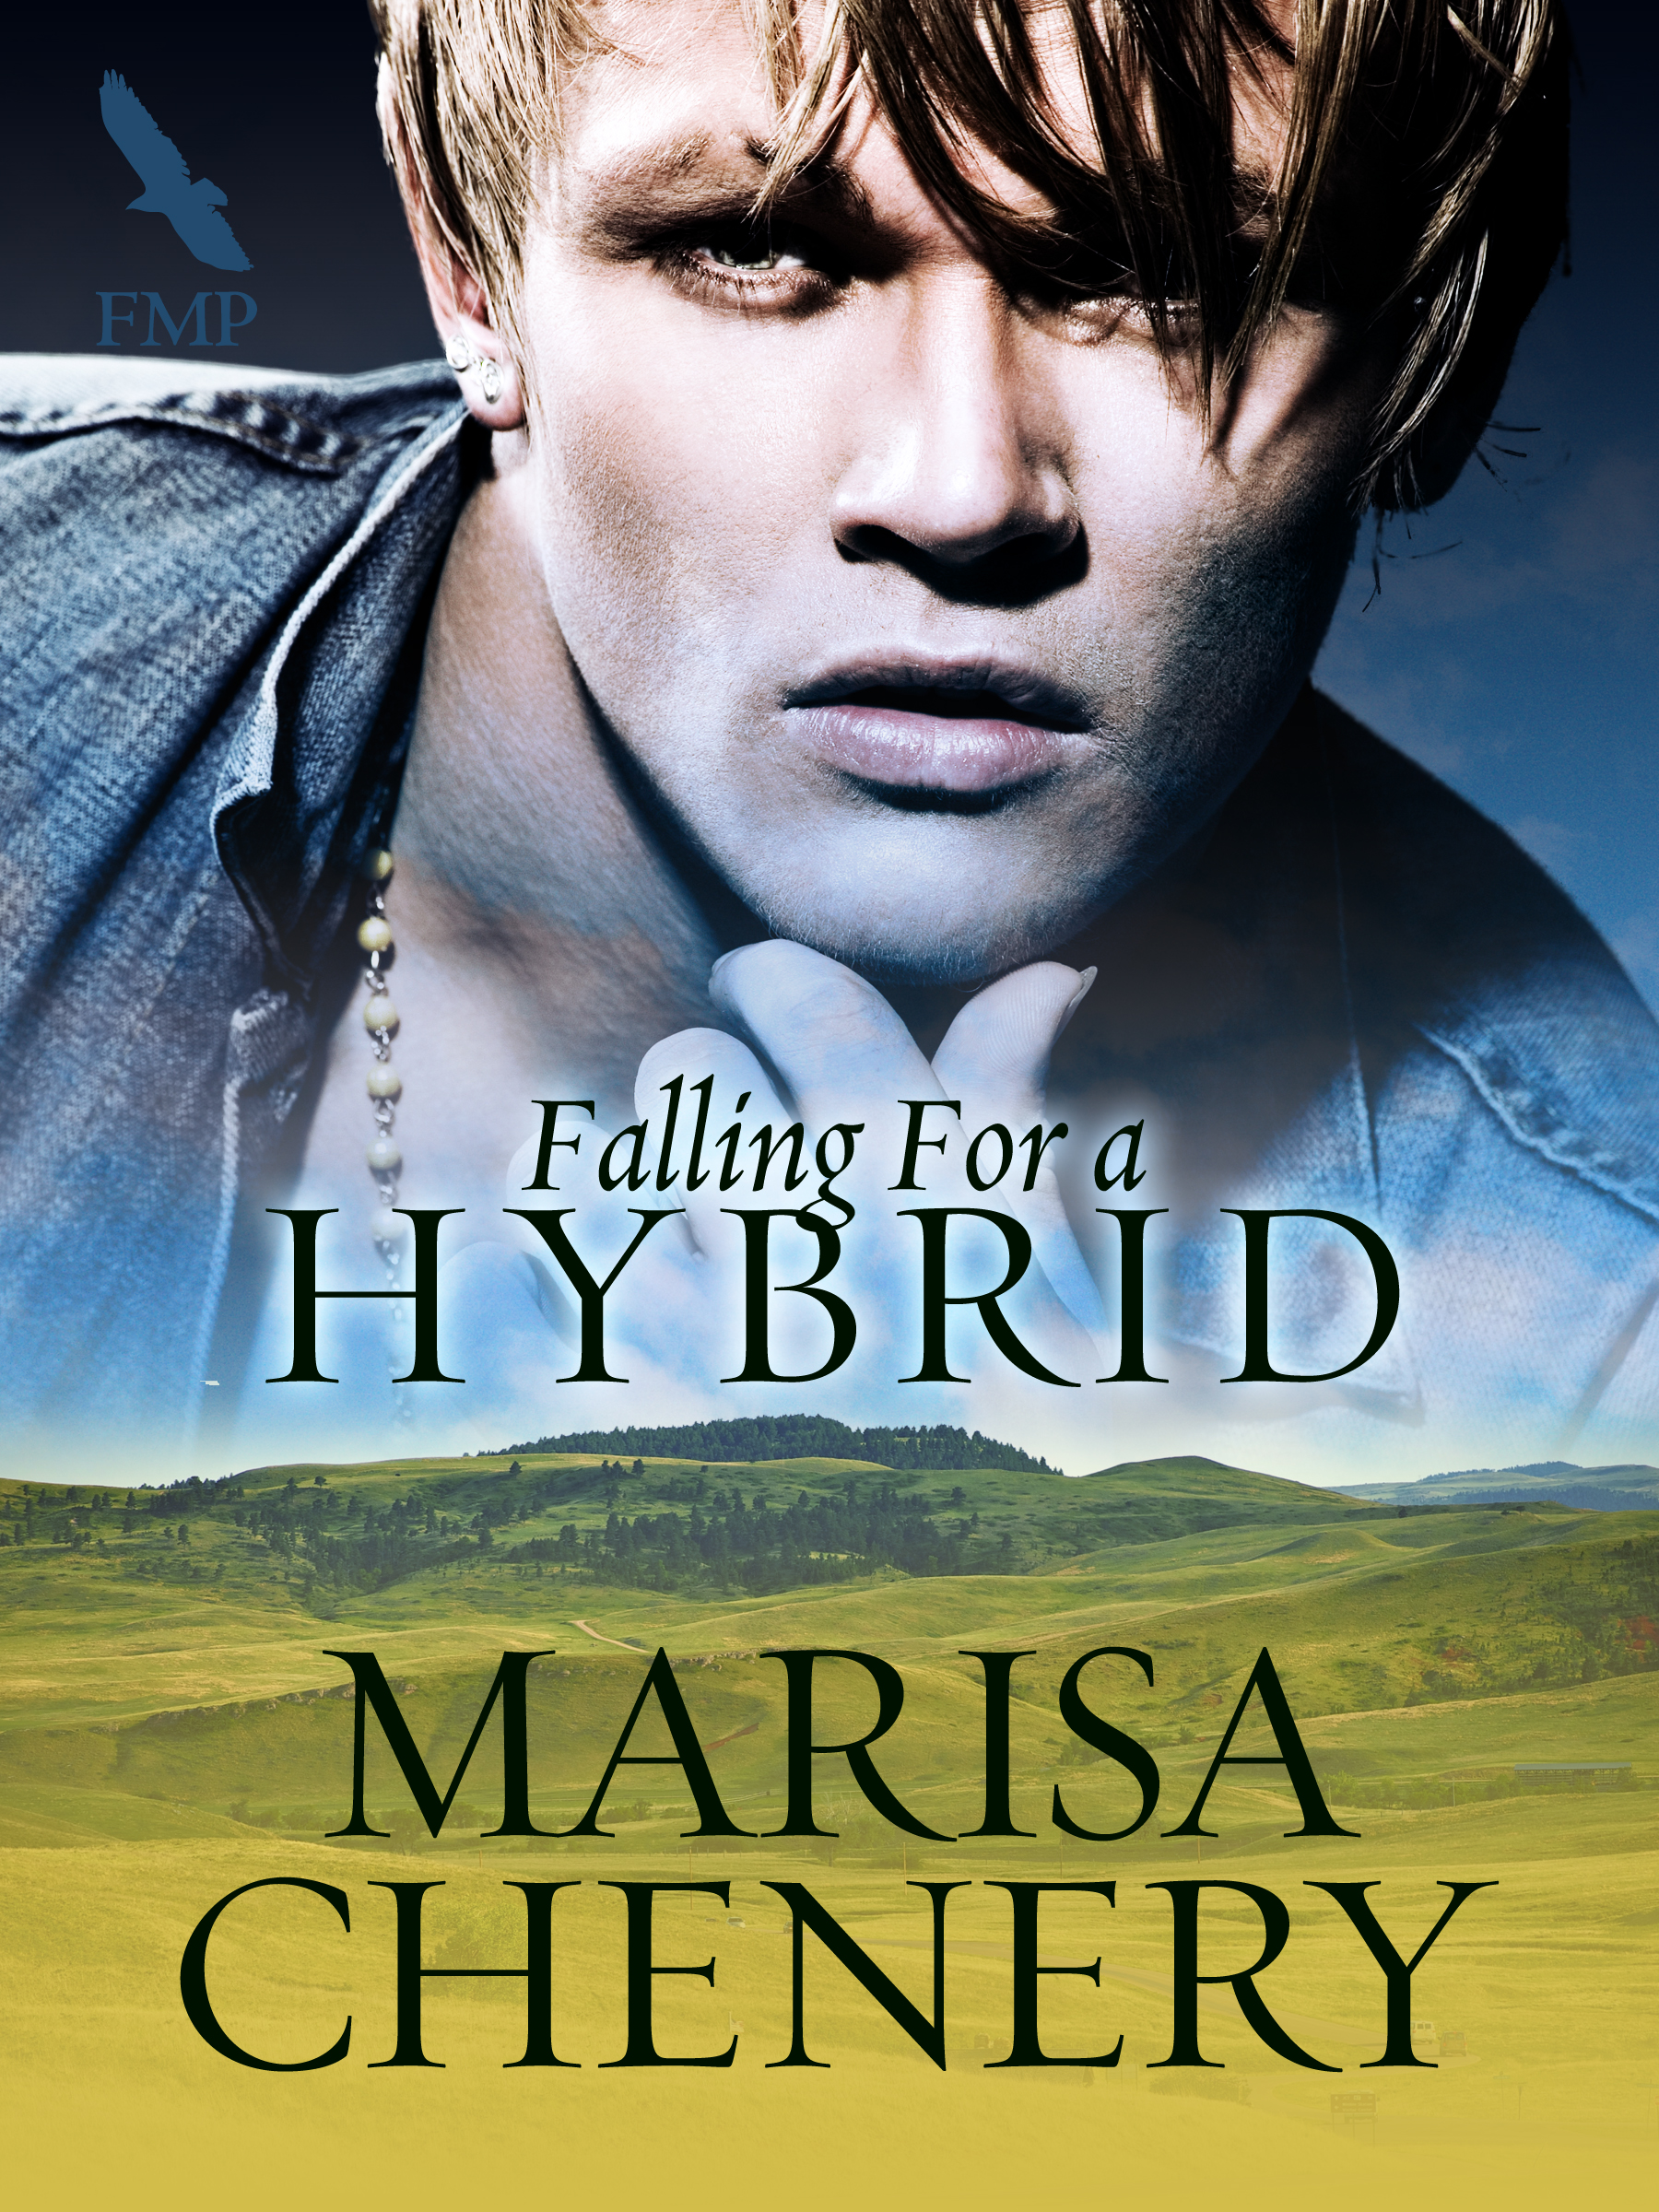 Falling For a Hybrid (2014)